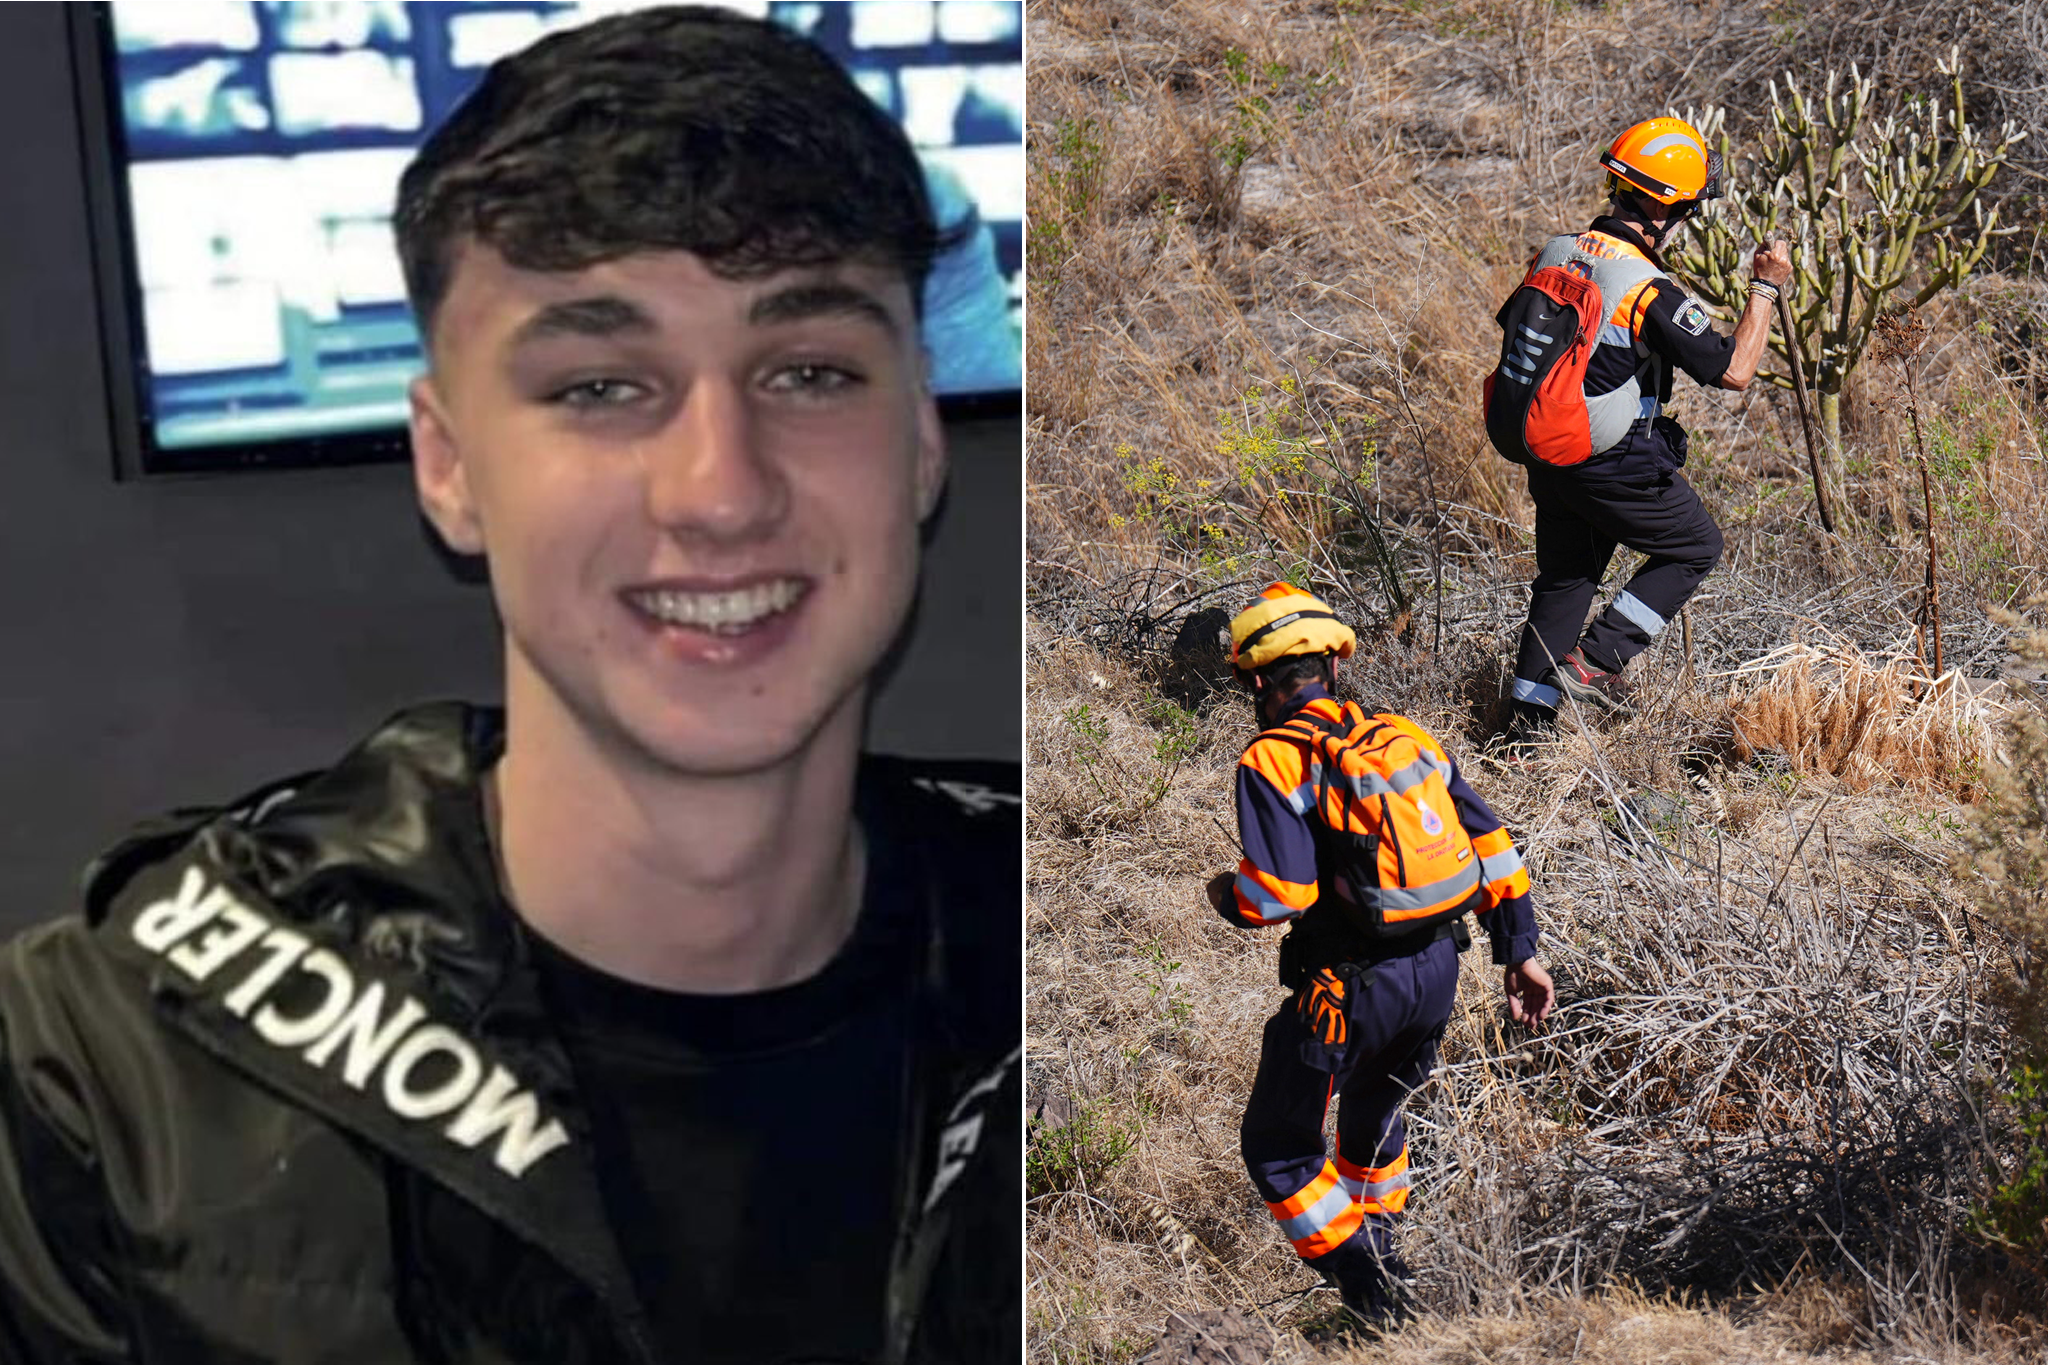 tenerife, missing person, having seen the area first hand, here’s why so little progress has been made in finding jay slater